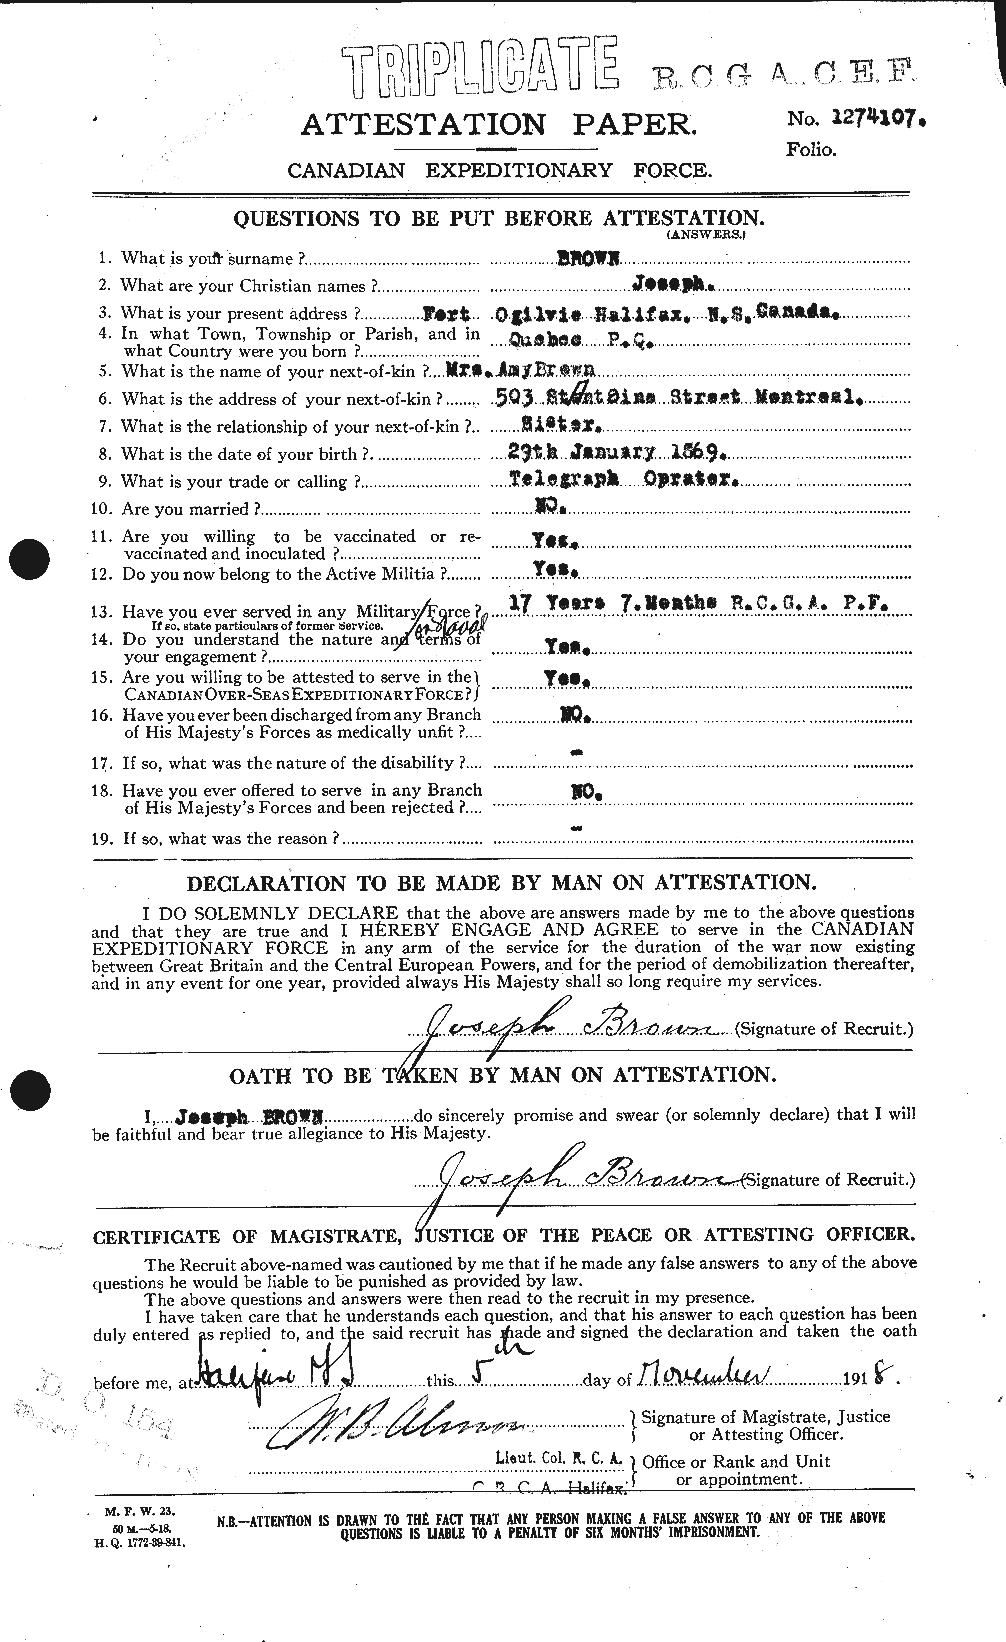 Personnel Records of the First World War - CEF 265921a